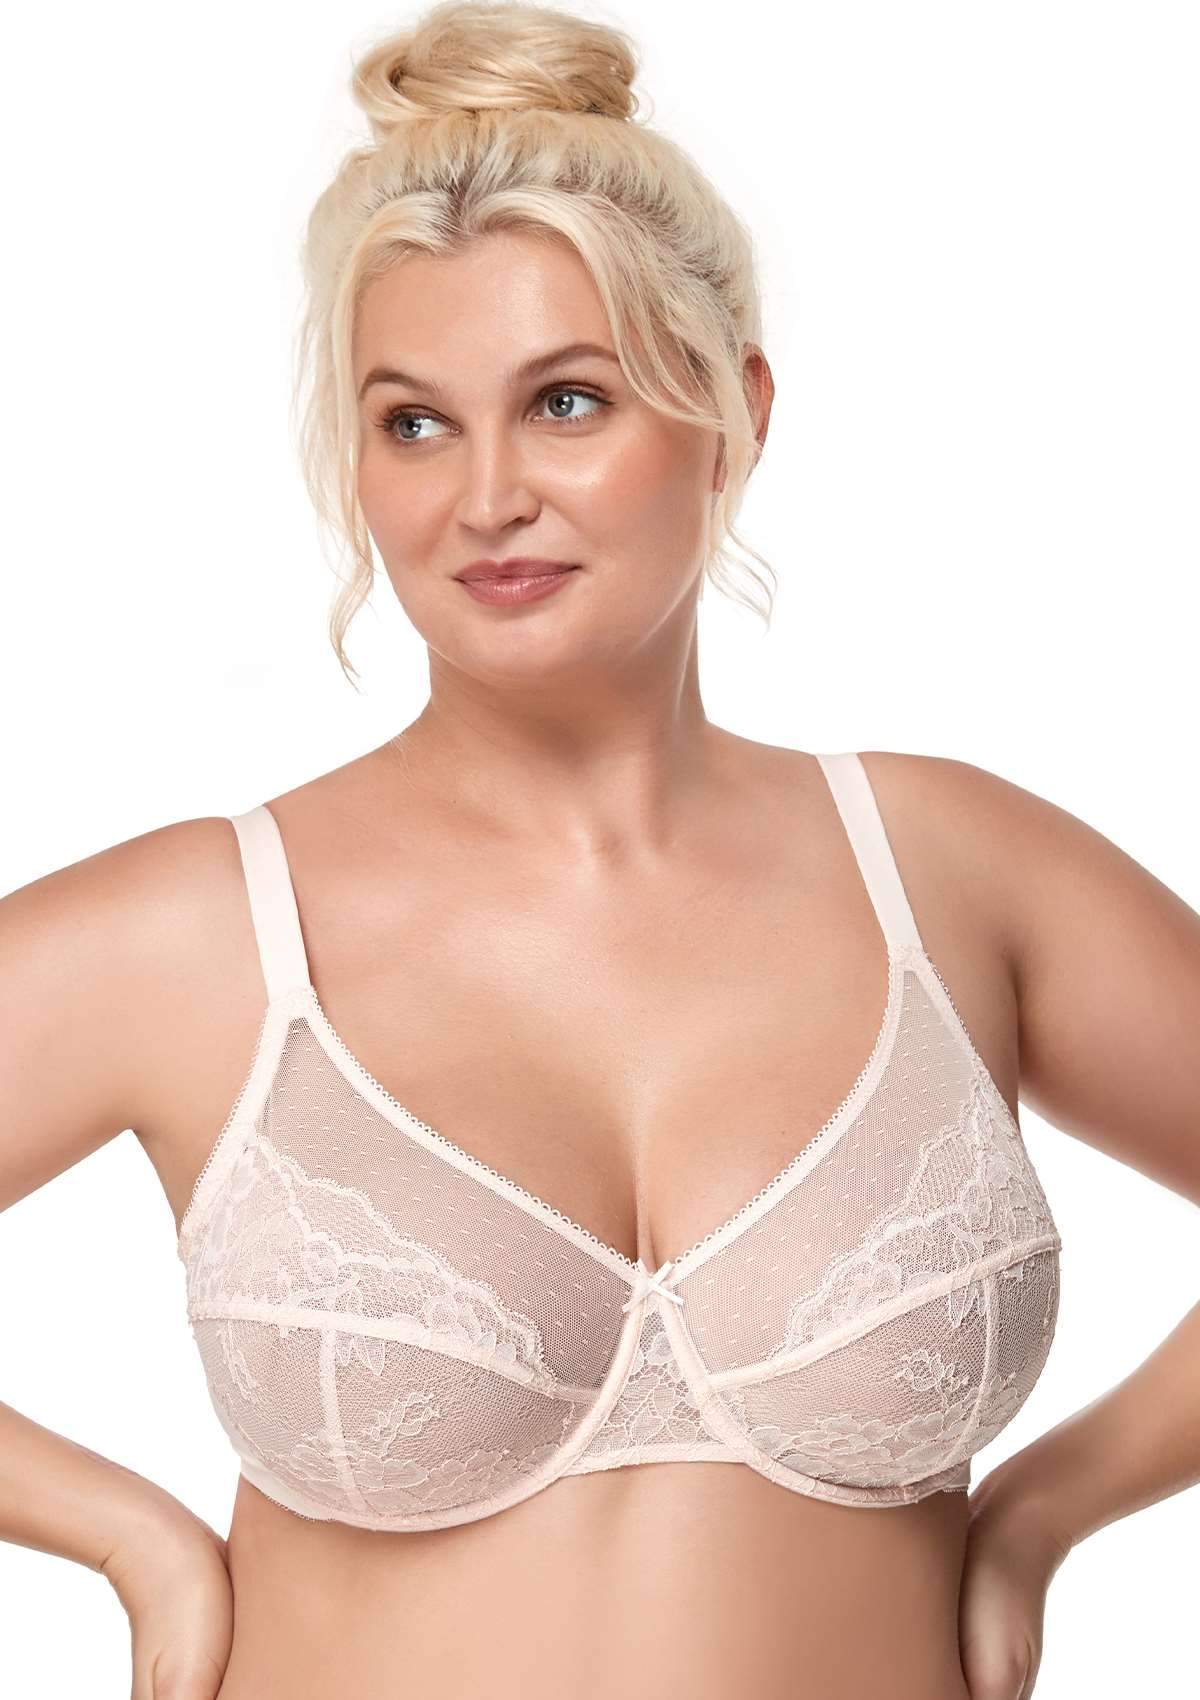 HSIA Enchante Lacy Bra: Comfy Sheer Lace Bra With Lift - Dusty Peach / 38 / C